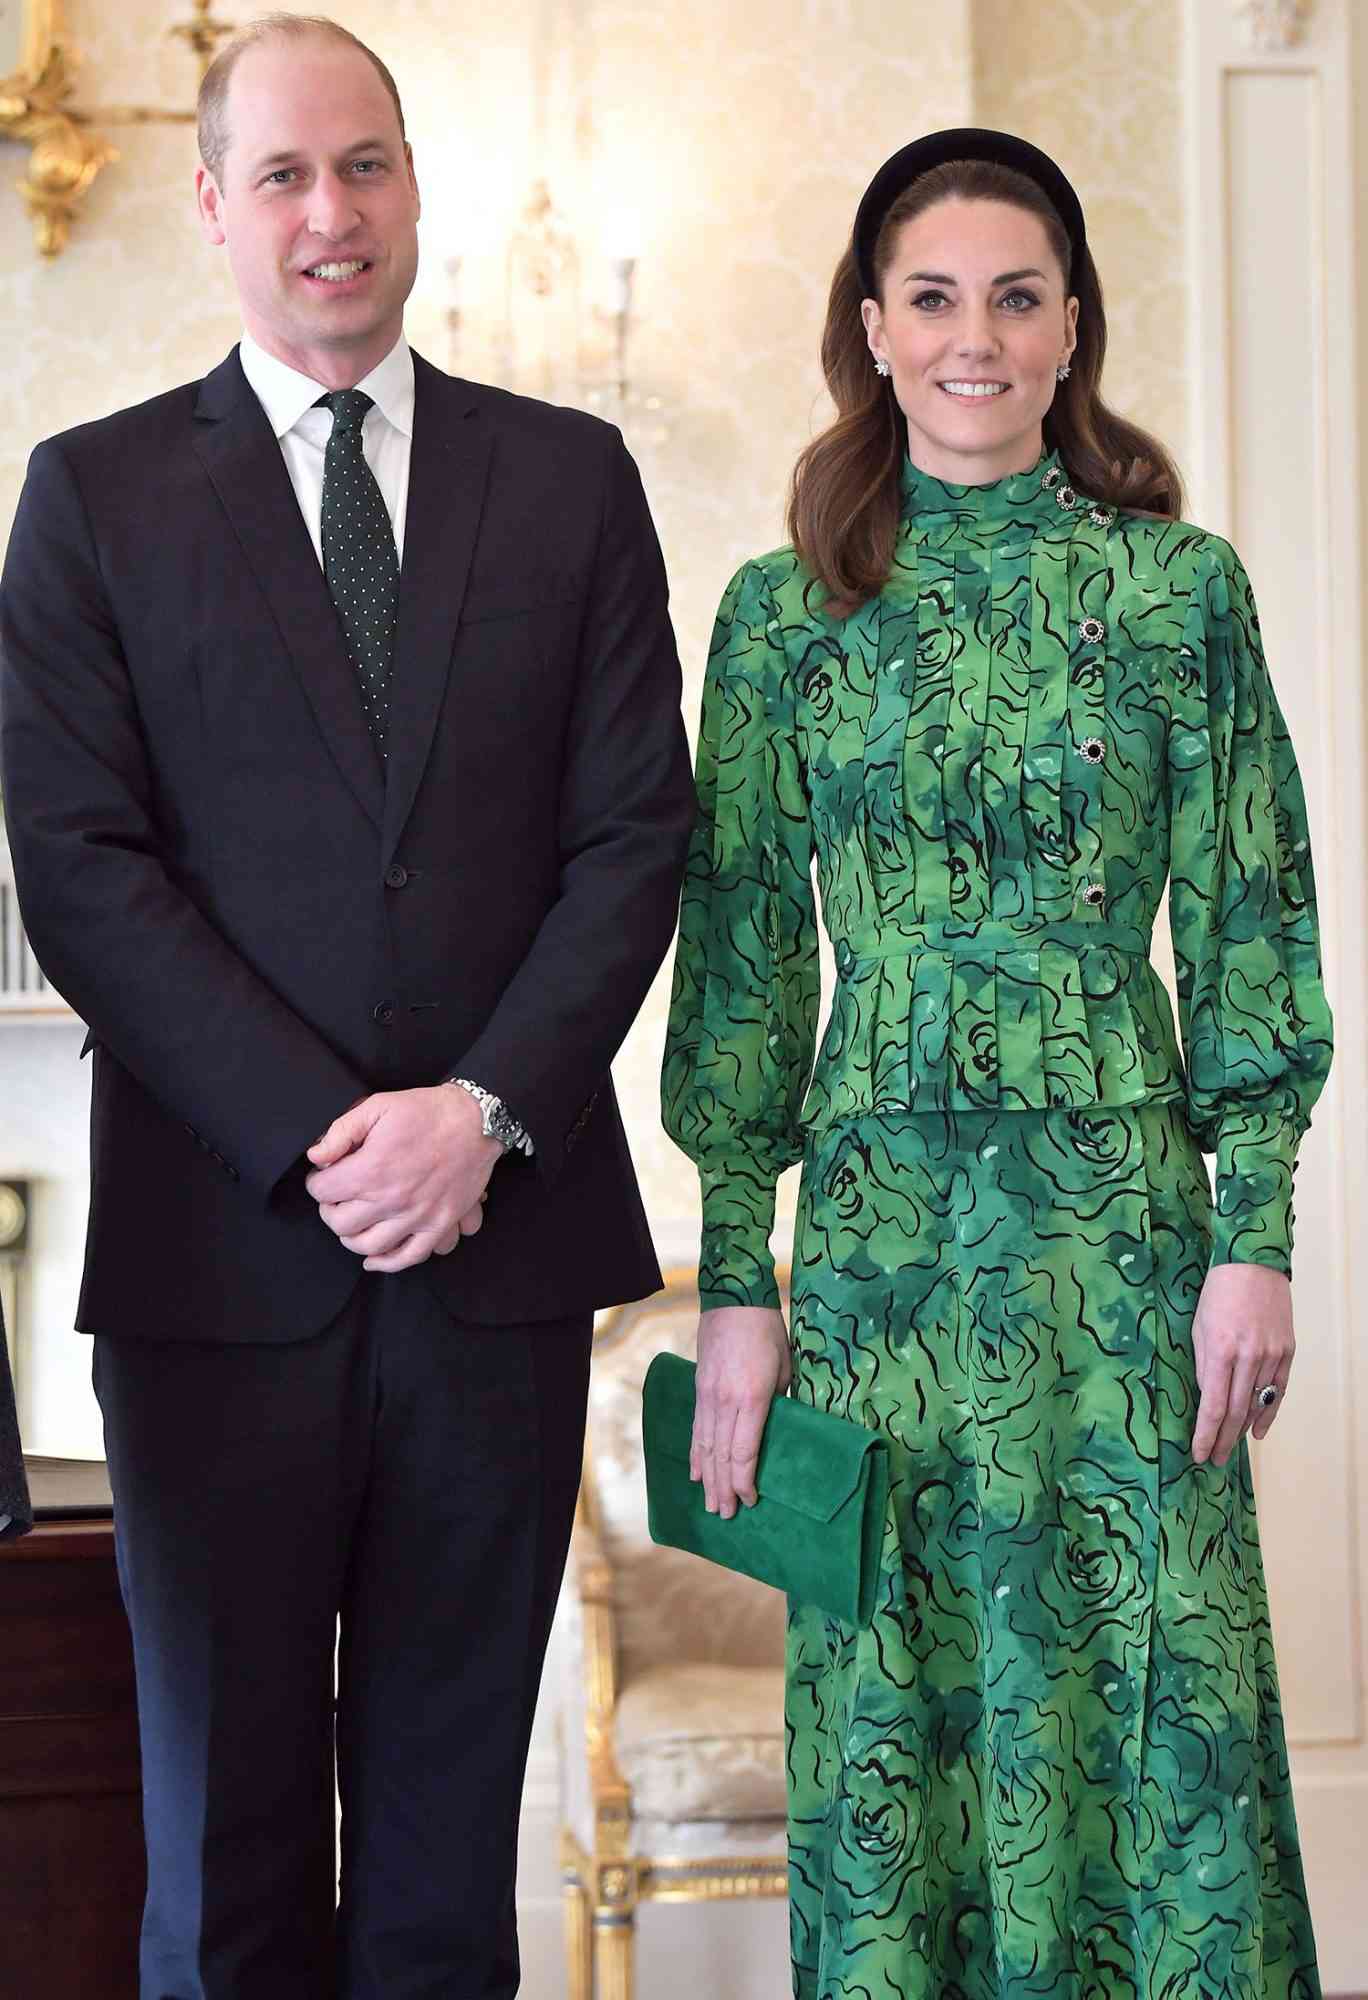 Prince William, Duke of Cambridge and Catherine, Duchess of Cambridge arrive for a meeting with the President of Ireland at &Aacute;ras an Uachtar&aacute;in on March 03, 2020 in Dublin, Ireland